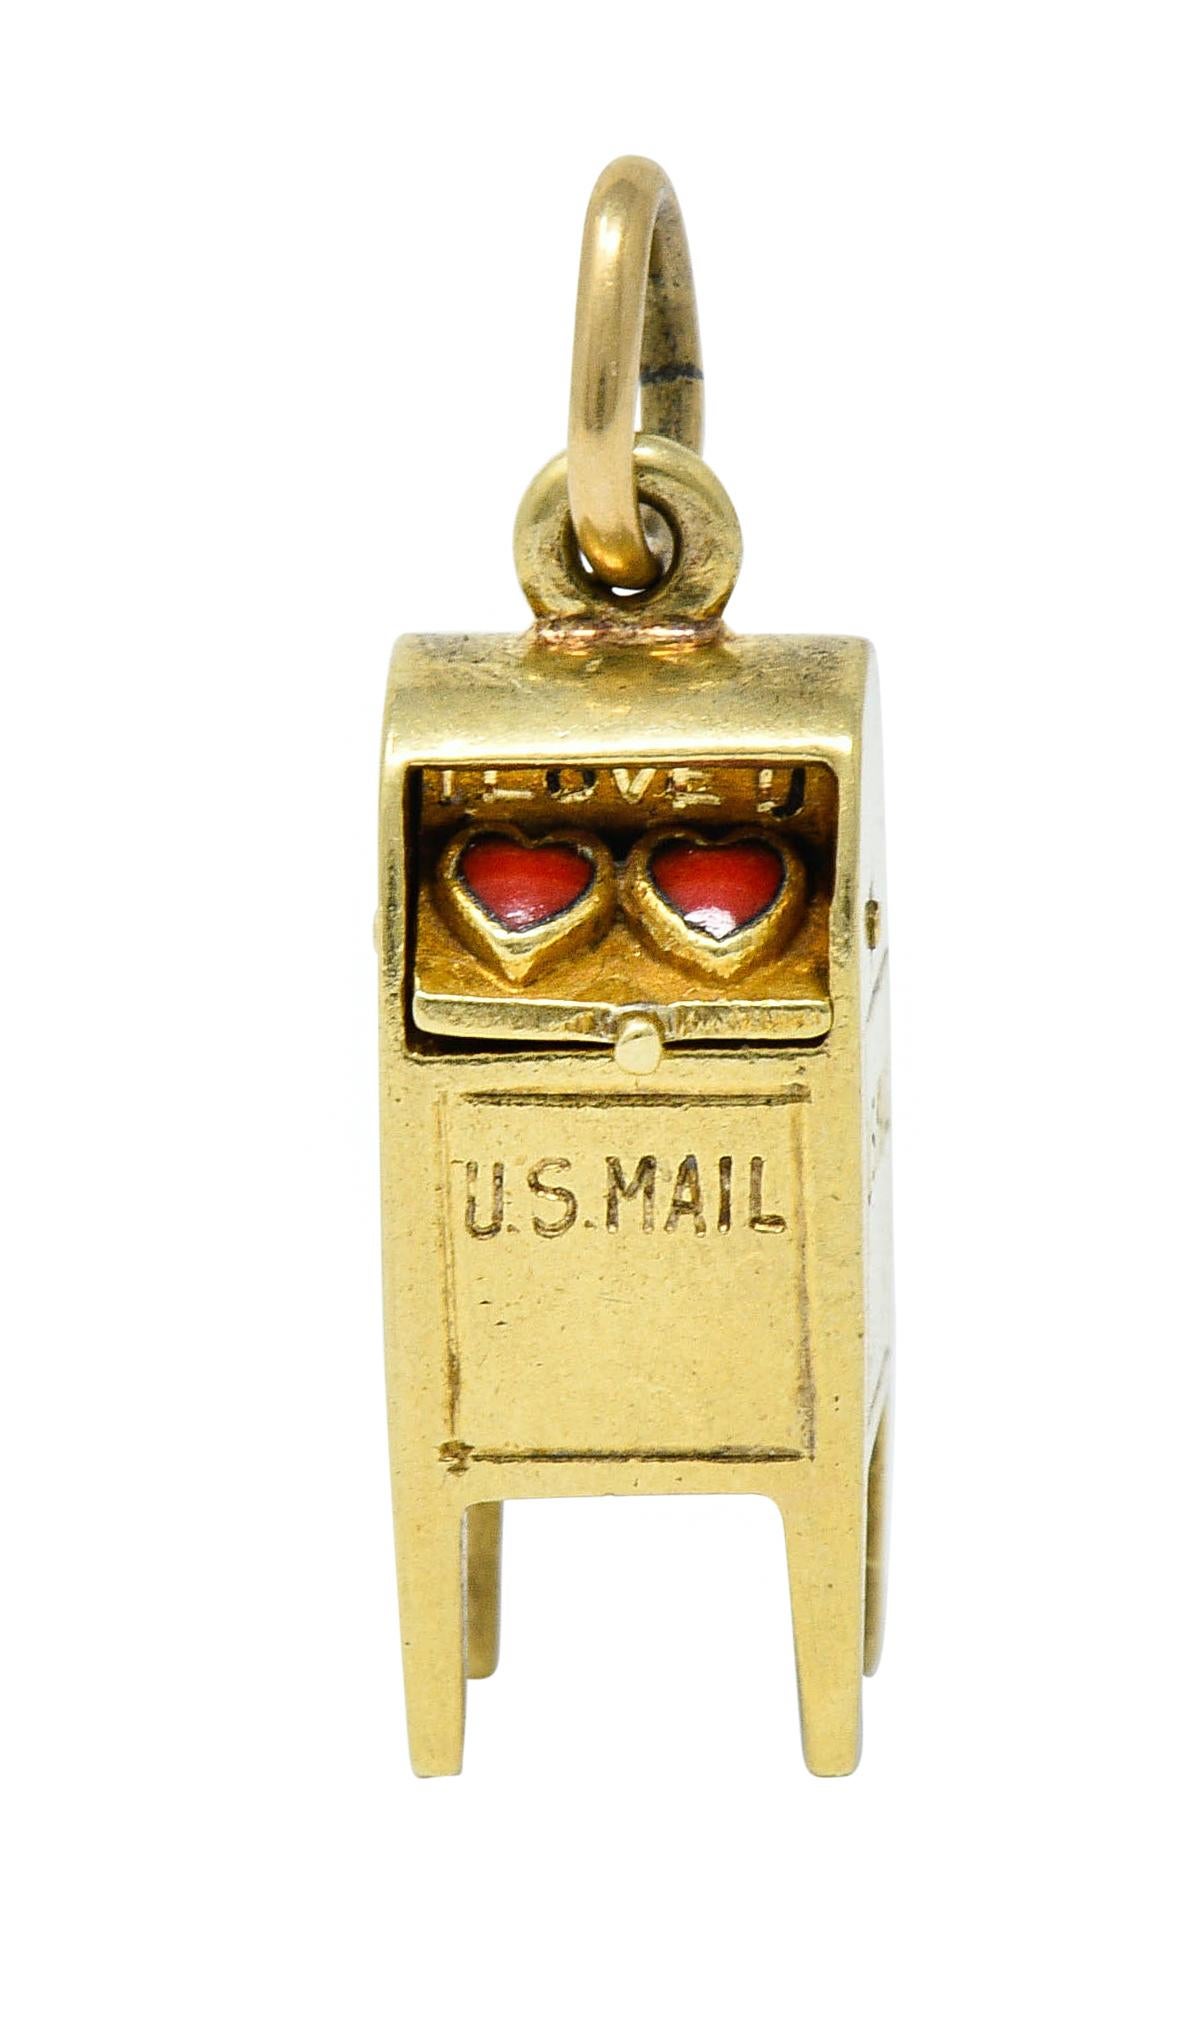 Designed as a domed mailbox

Deeply engraved 'US Mail'

Articulated door pivots open on a hinge

Revealing two bright red enamel hearts; no loss

Stamped 14K for 14 karat gold

Maker's mark for Sloan & Co.

Circa: 1940s

Measures: 1/4 x 13/16 inch